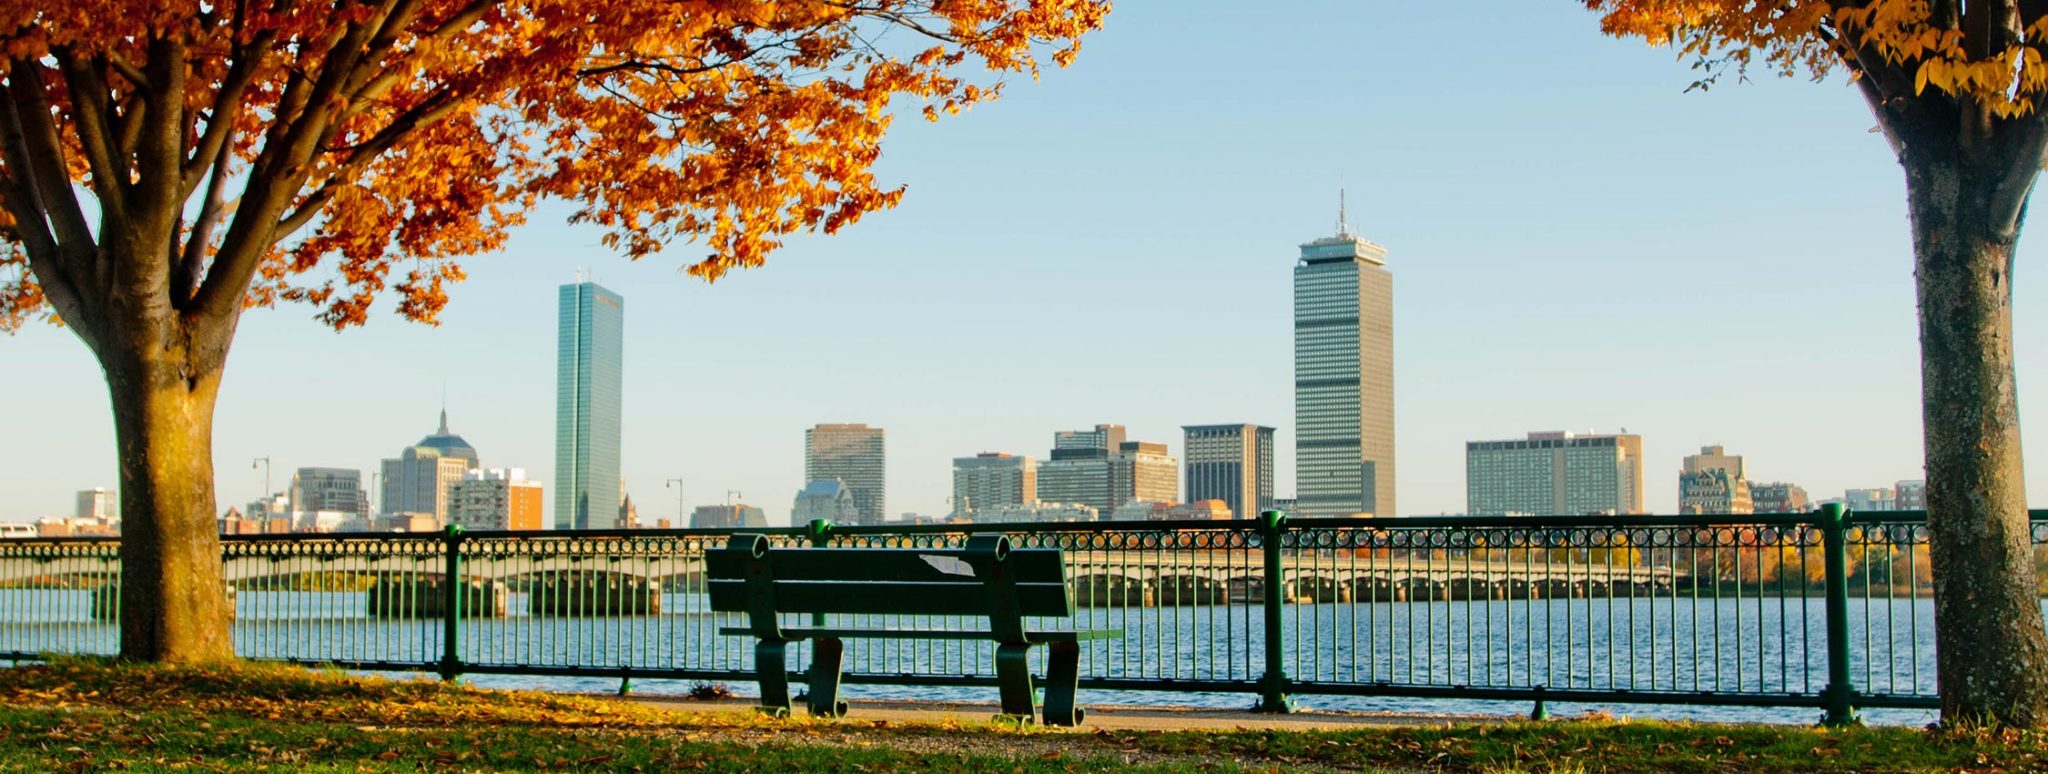 5 Cities for Fall Travel